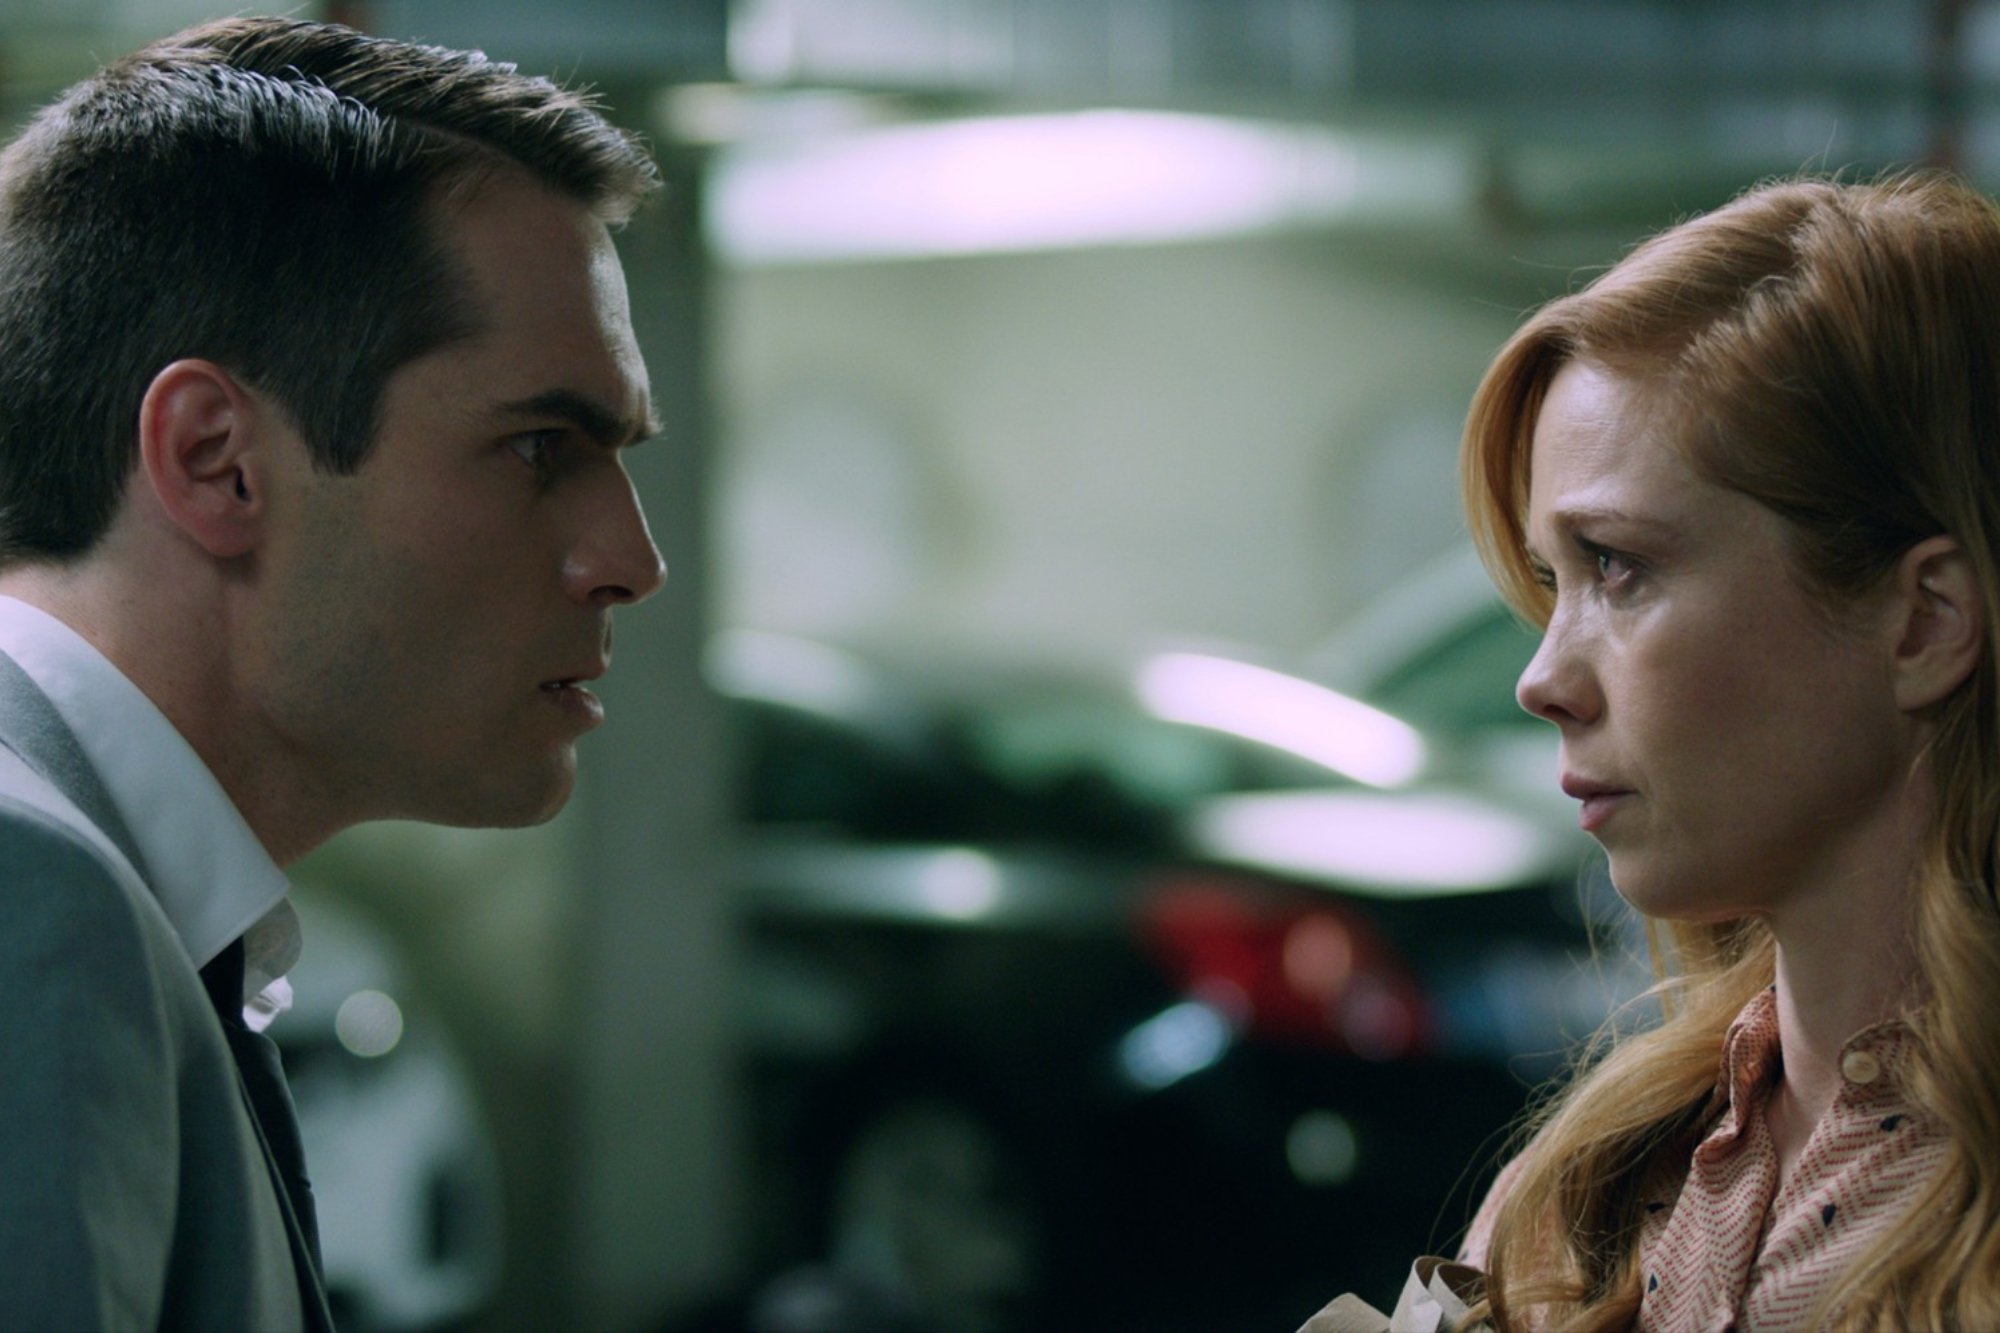 'The Beta Test' actors Jim Cummings as Jordan and Virginia Newcomb as Caroline looking intensely at each other in a parking lot